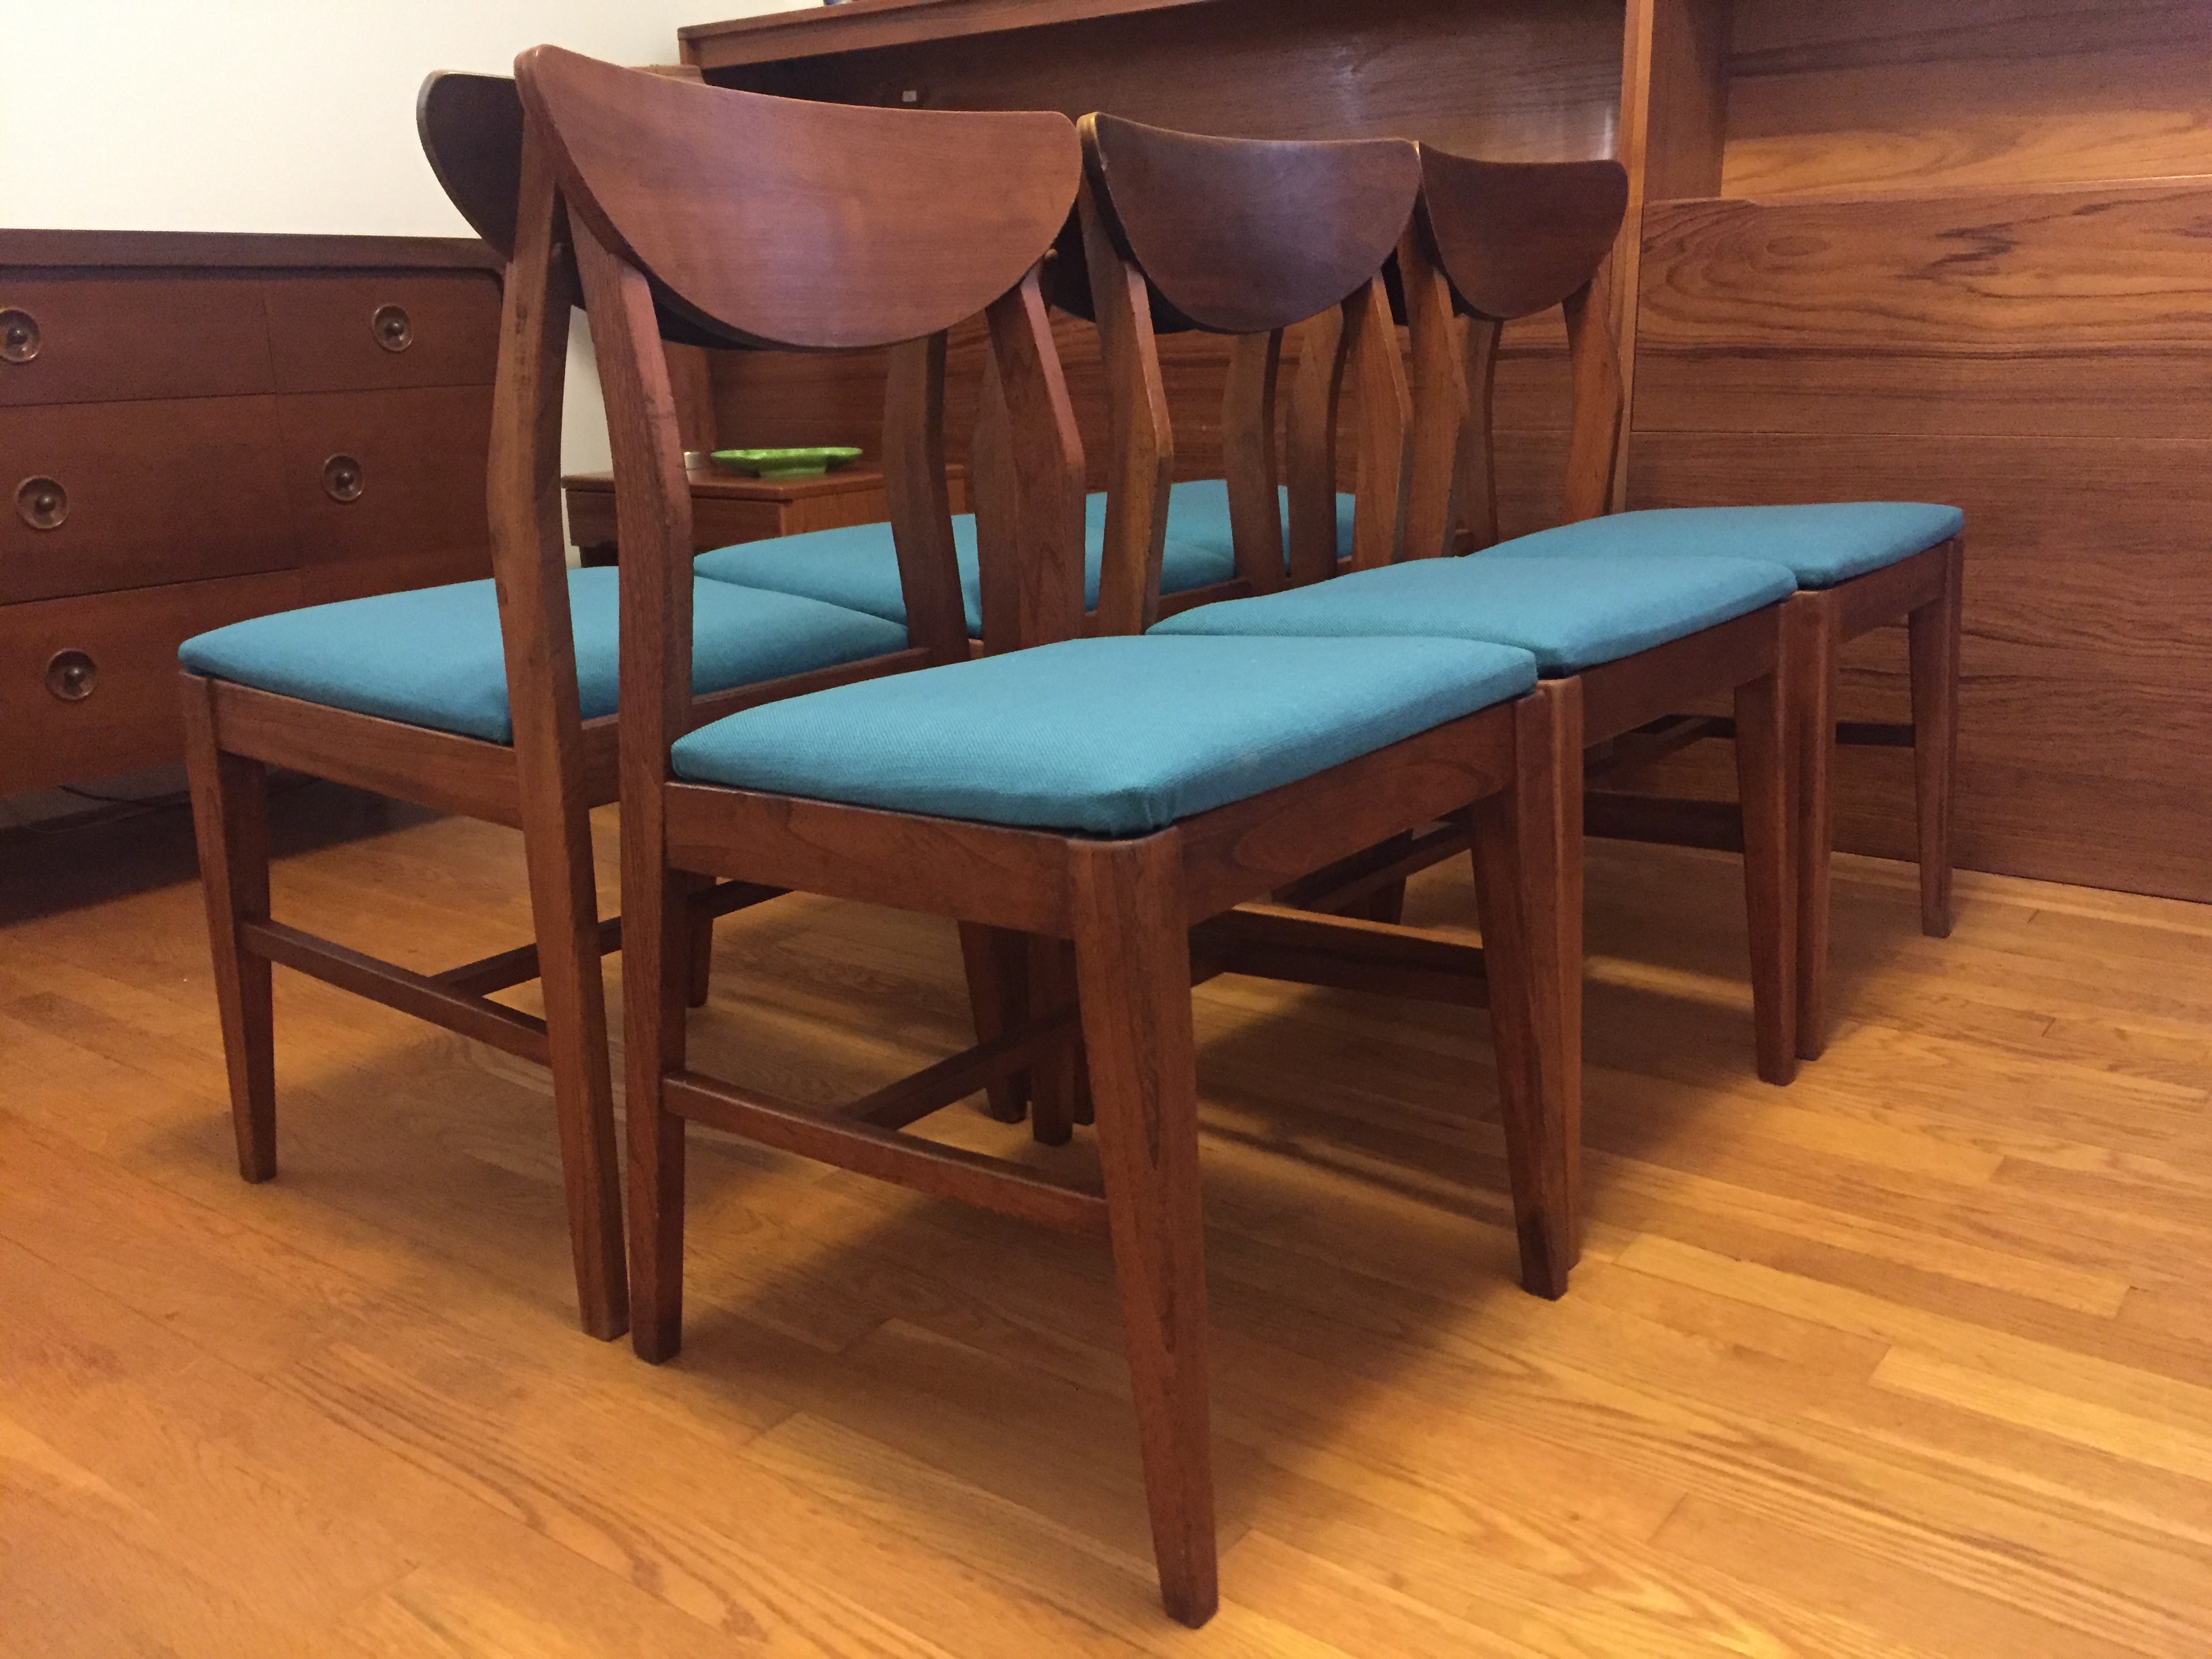 Basset Mid Century Dining Room Table And Chairs